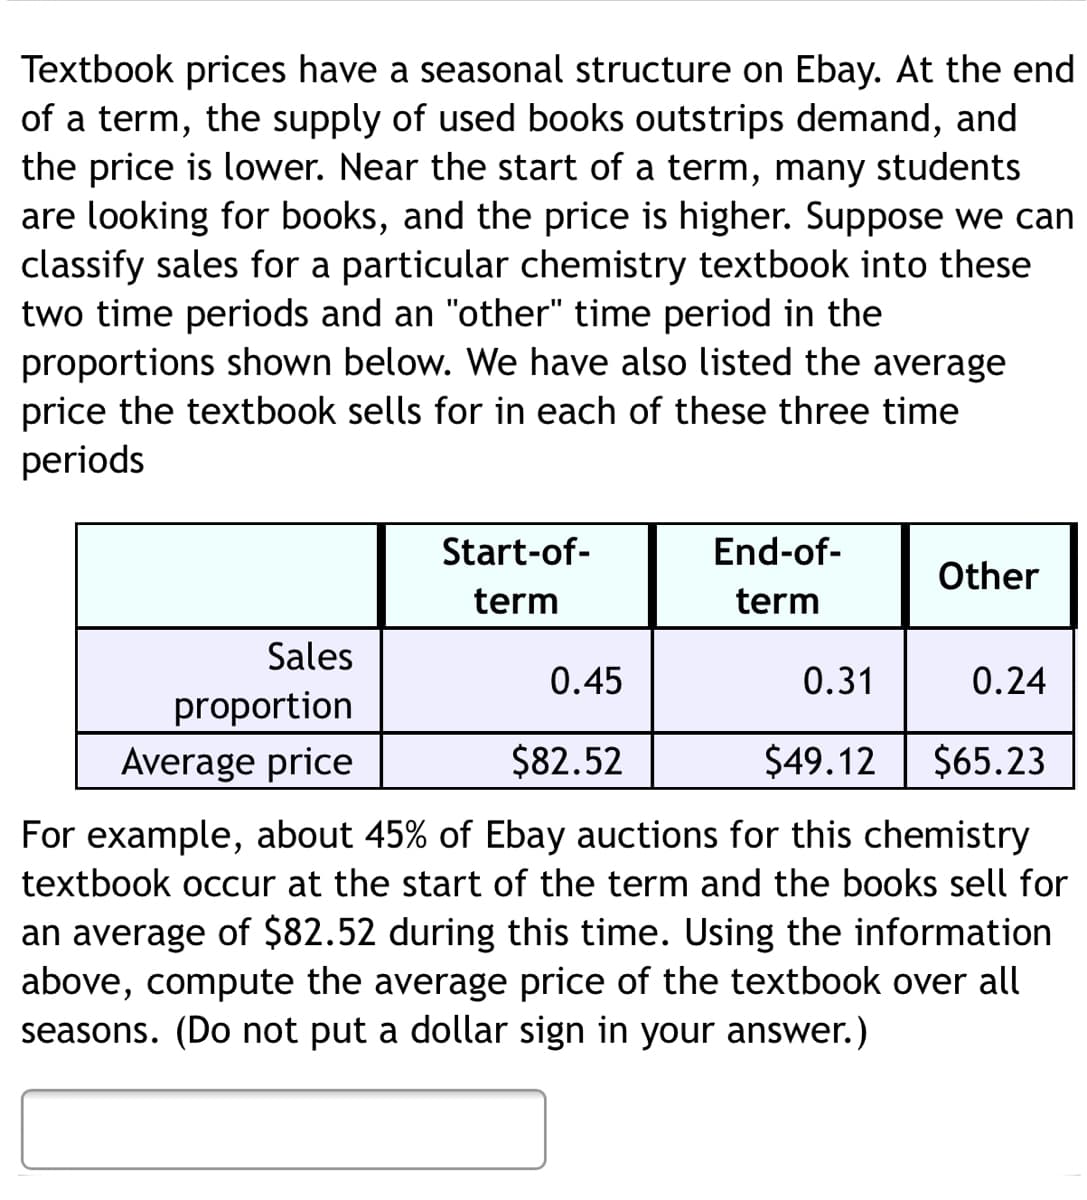 Textbook prices have a seasonal structure on Ebay. At the end
of a term, the supply of used books outstrips demand, and
the price is lower. Near the start of a term, many students
are looking for books, and the price is higher. Suppose we can
classify sales for a particular chemistry textbook into these
two time periods and an "other" time period in the
proportions shown below. We have also listed the average
price the textbook sells for in each of these three time
periods
Start-of-
End-of-
Other
term
term
Sales
0.45
0.31
0.24
proportion
Average price
$82.52
$49.12
$65.23
For example, about 45% of Ebay auctions for this chemistry
textbook occur at the start of the term and the books sell for
an average of $82.52 during this time. Using the information
above, compute the average price of the textbook over all
seasons. (Do not put a dollar sign in your answer.)
